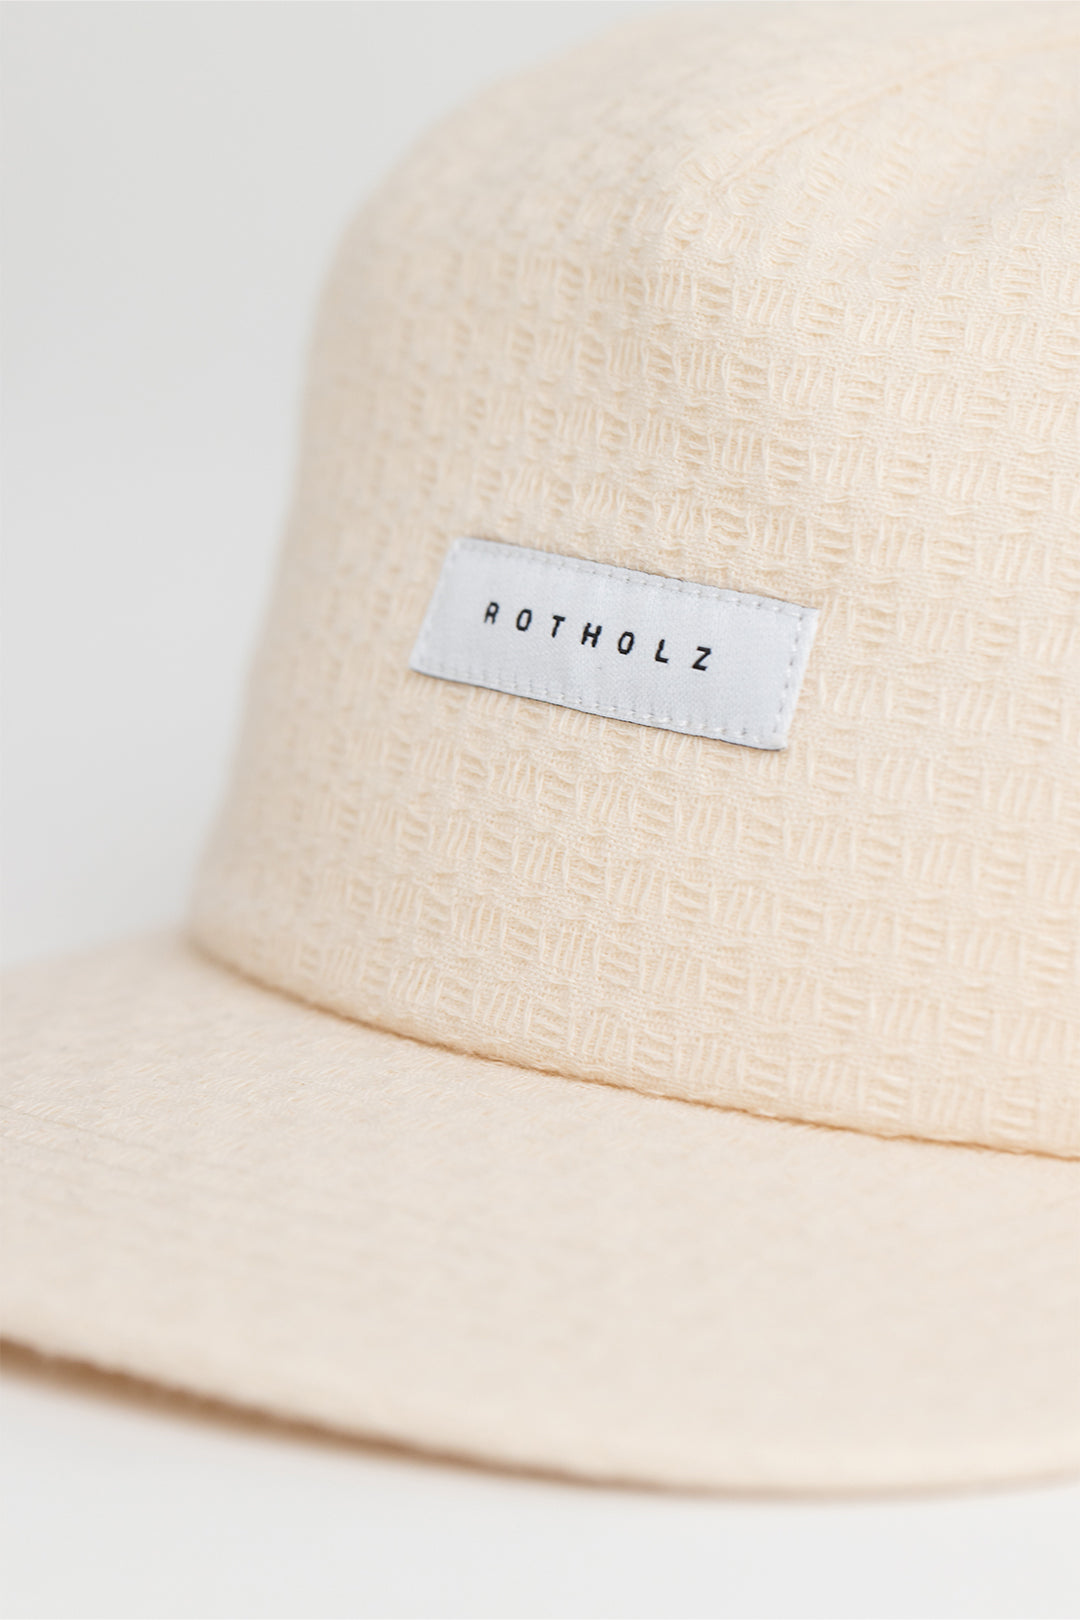 Beige cap floppy made from 100% organic cotton from Rotholz